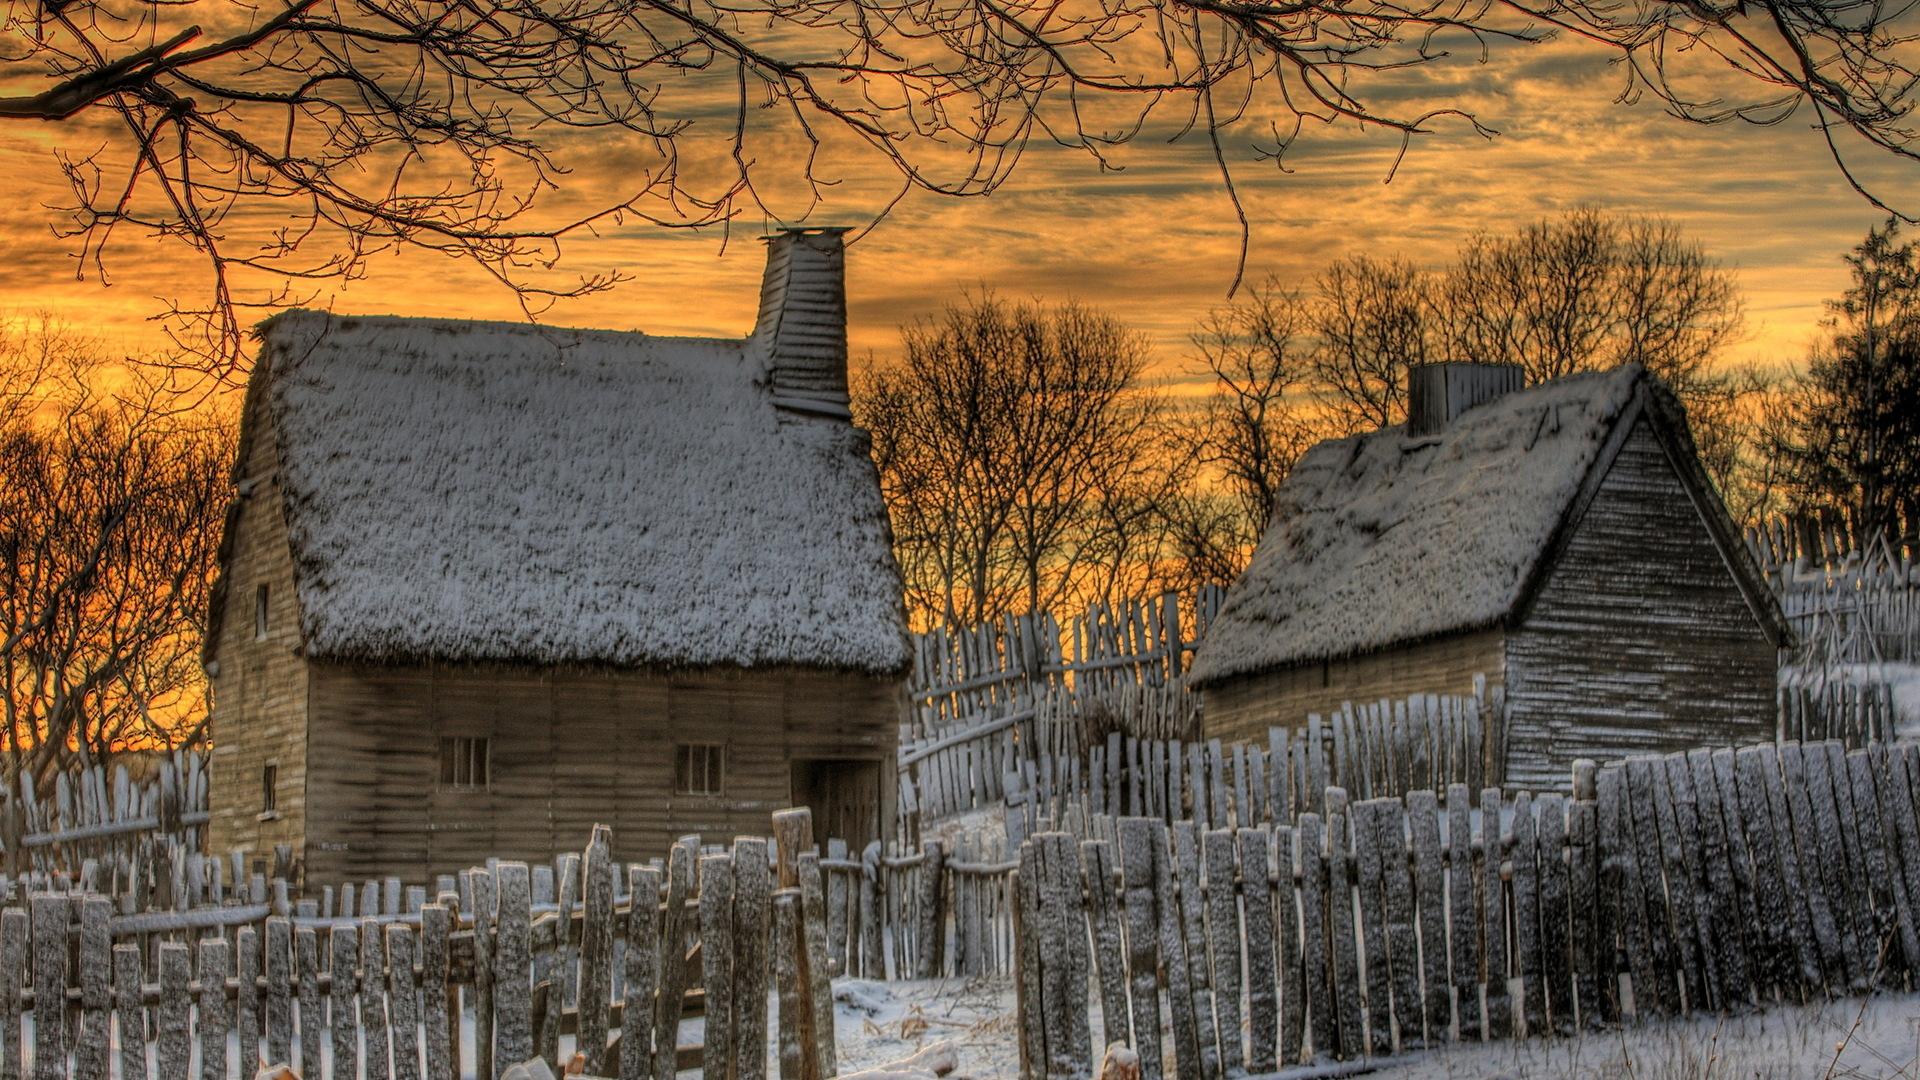 Thatched Roofs Country Homes In Winter HDr Hq Wallpaper